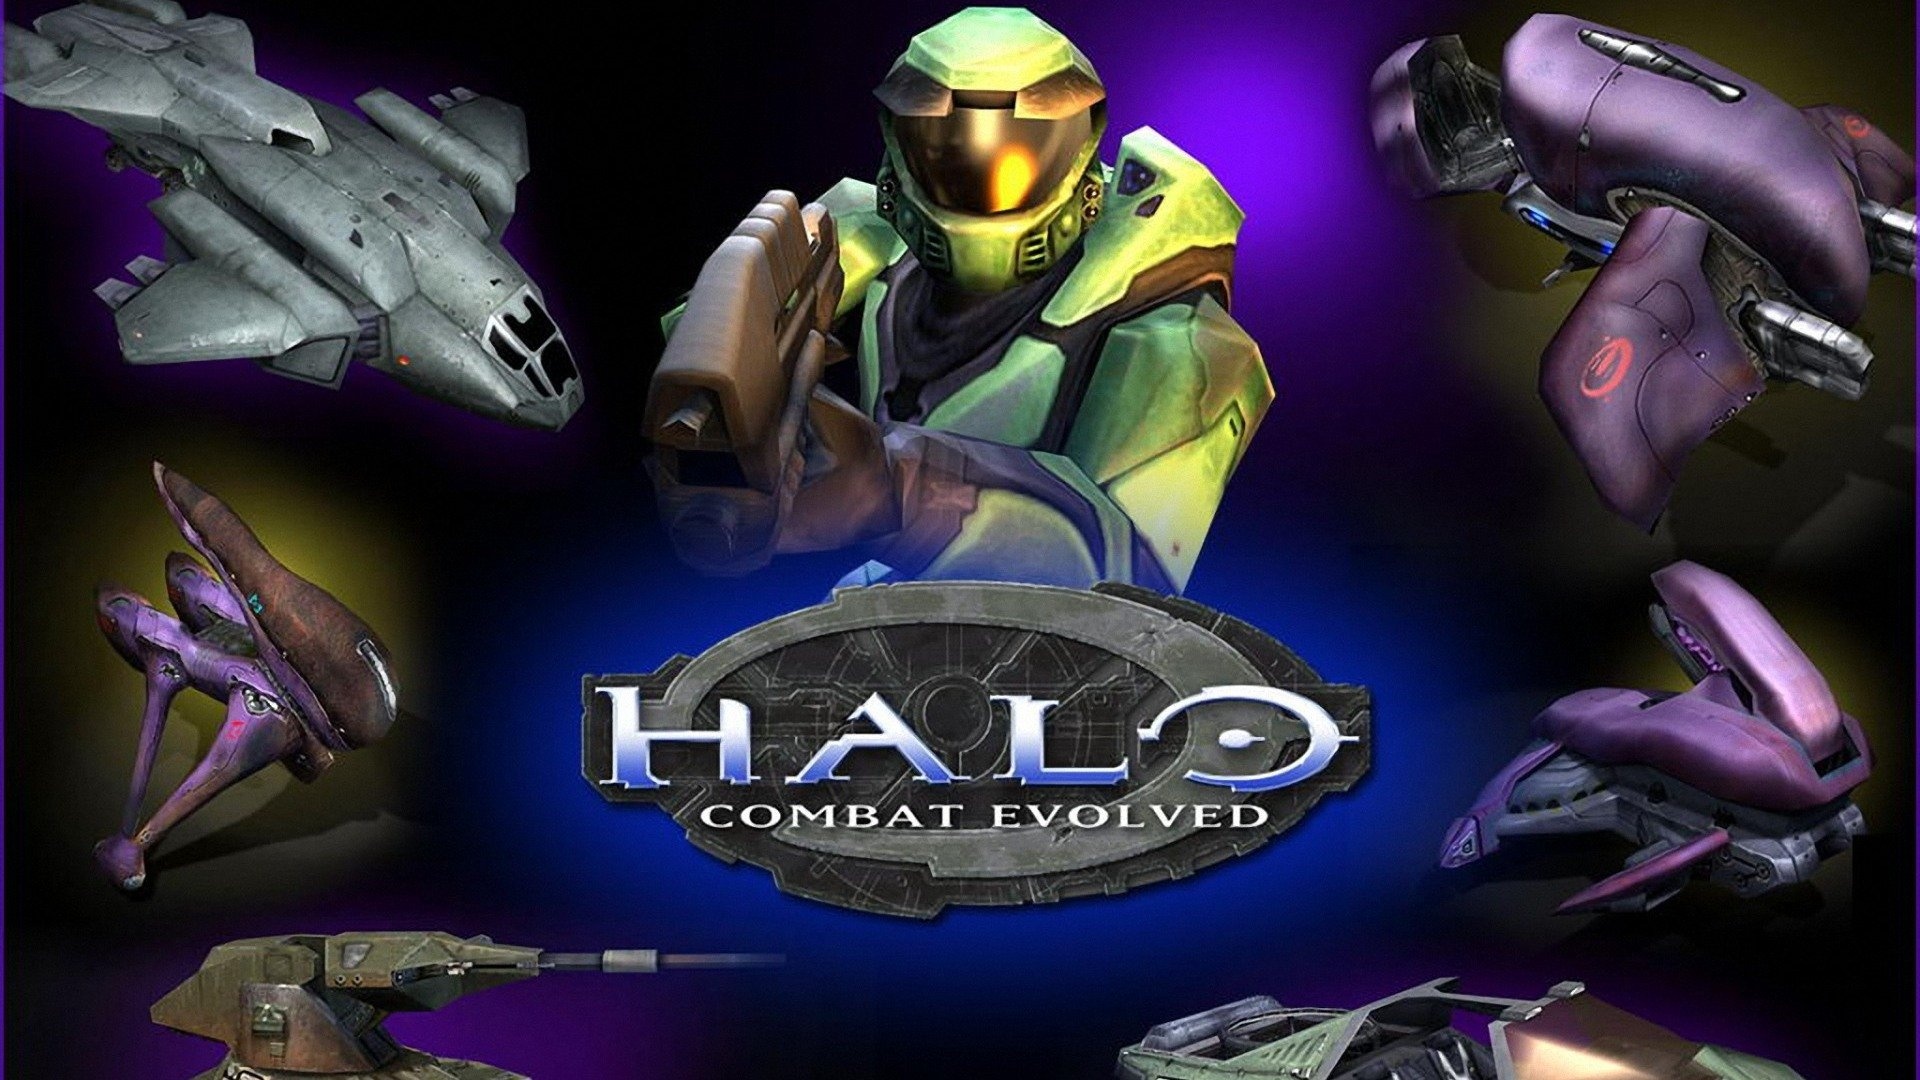 HALO COMBAT EVOLVED shooter fps action sci-fi futuristic 1combatevolved fighting warrior weapon gun wallpaper | | 585444 1920x1080